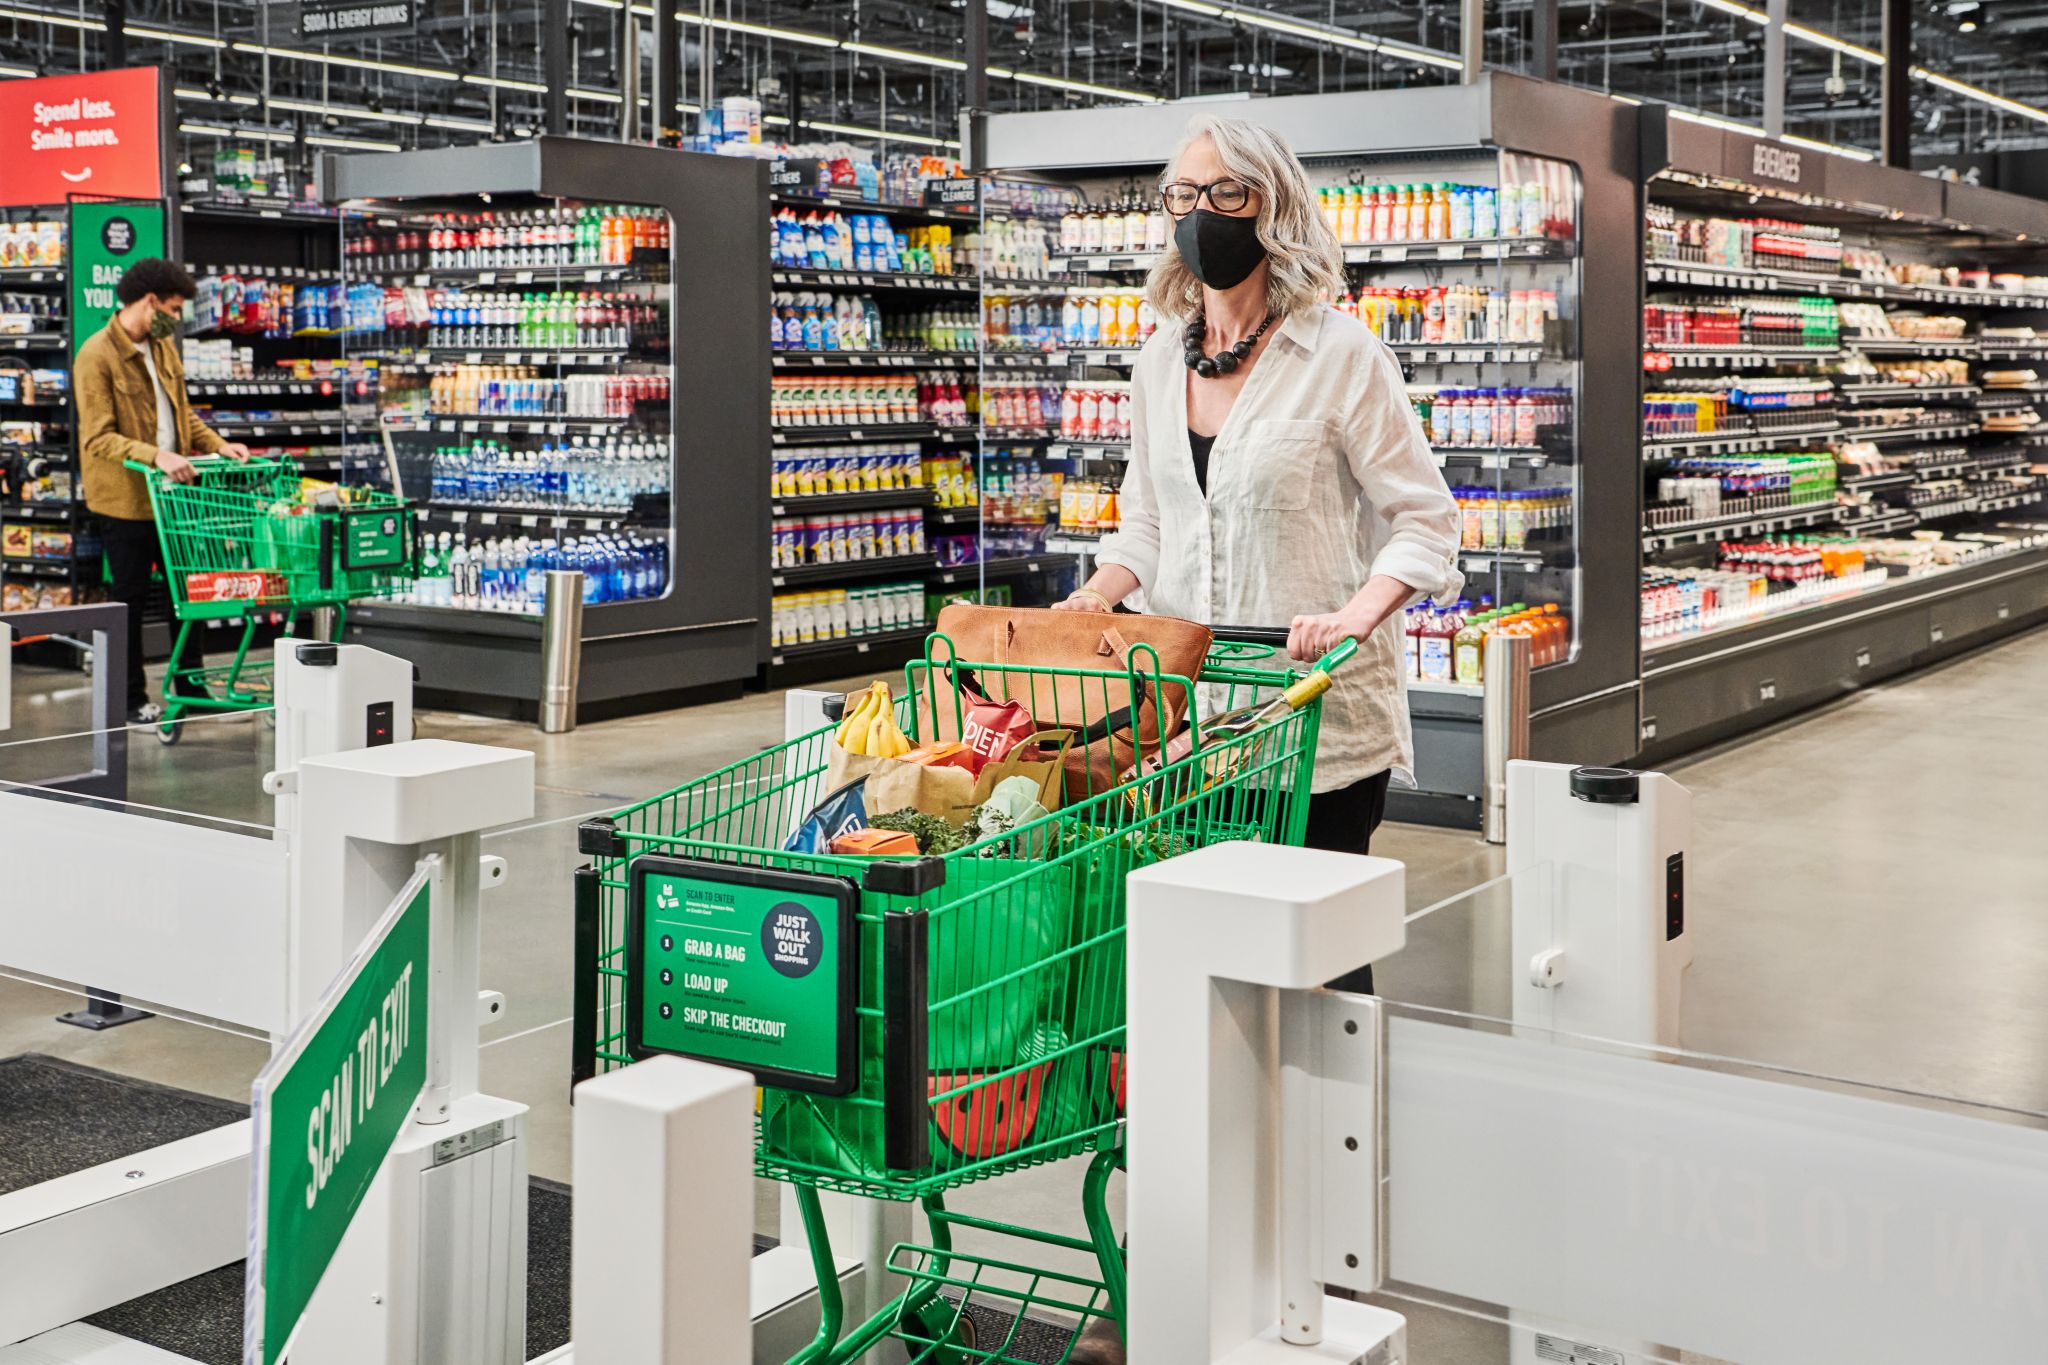 For Eastside shoppers looking for a quick and easy grocery shopping experience, the first full-service Amazon Fresh grocery store with 